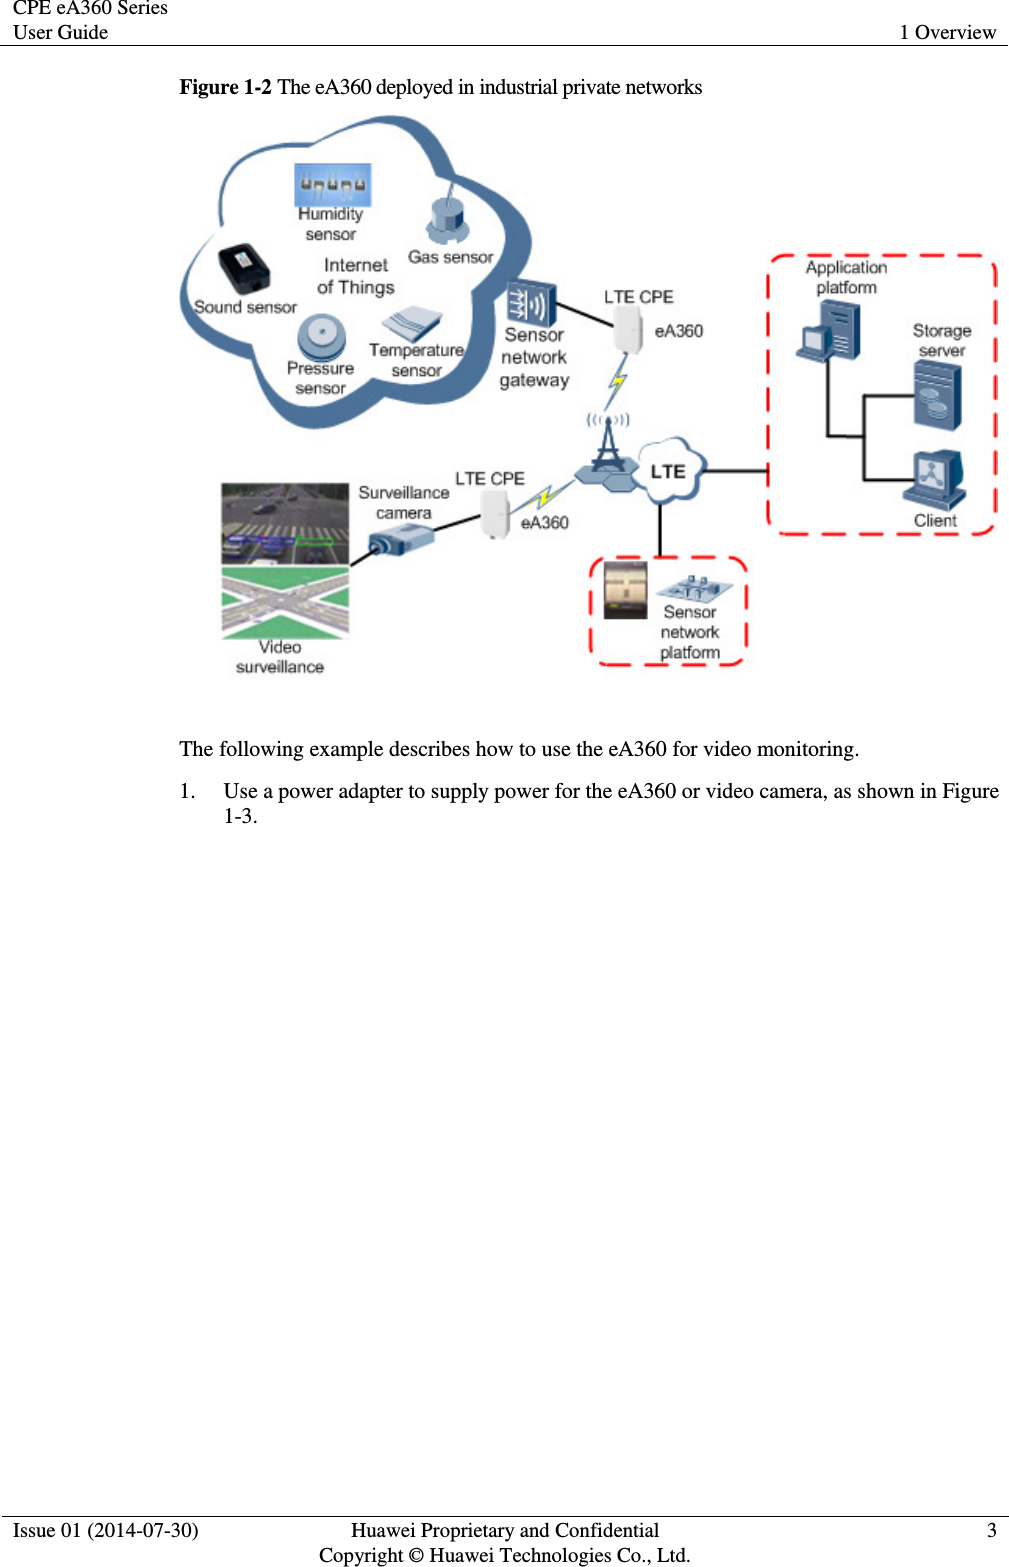 CPE eA360 Series User Guide 1 Overview  Issue 01 (2014-07-30) Huawei Proprietary and Confidential                                     Copyright © Huawei Technologies Co., Ltd. 3  Figure 1-2 The eA360 deployed in industrial private networks   The following example describes how to use the eA360 for video monitoring. 1. Use a power adapter to supply power for the eA360 or video camera, as shown in Figure 1-3. 